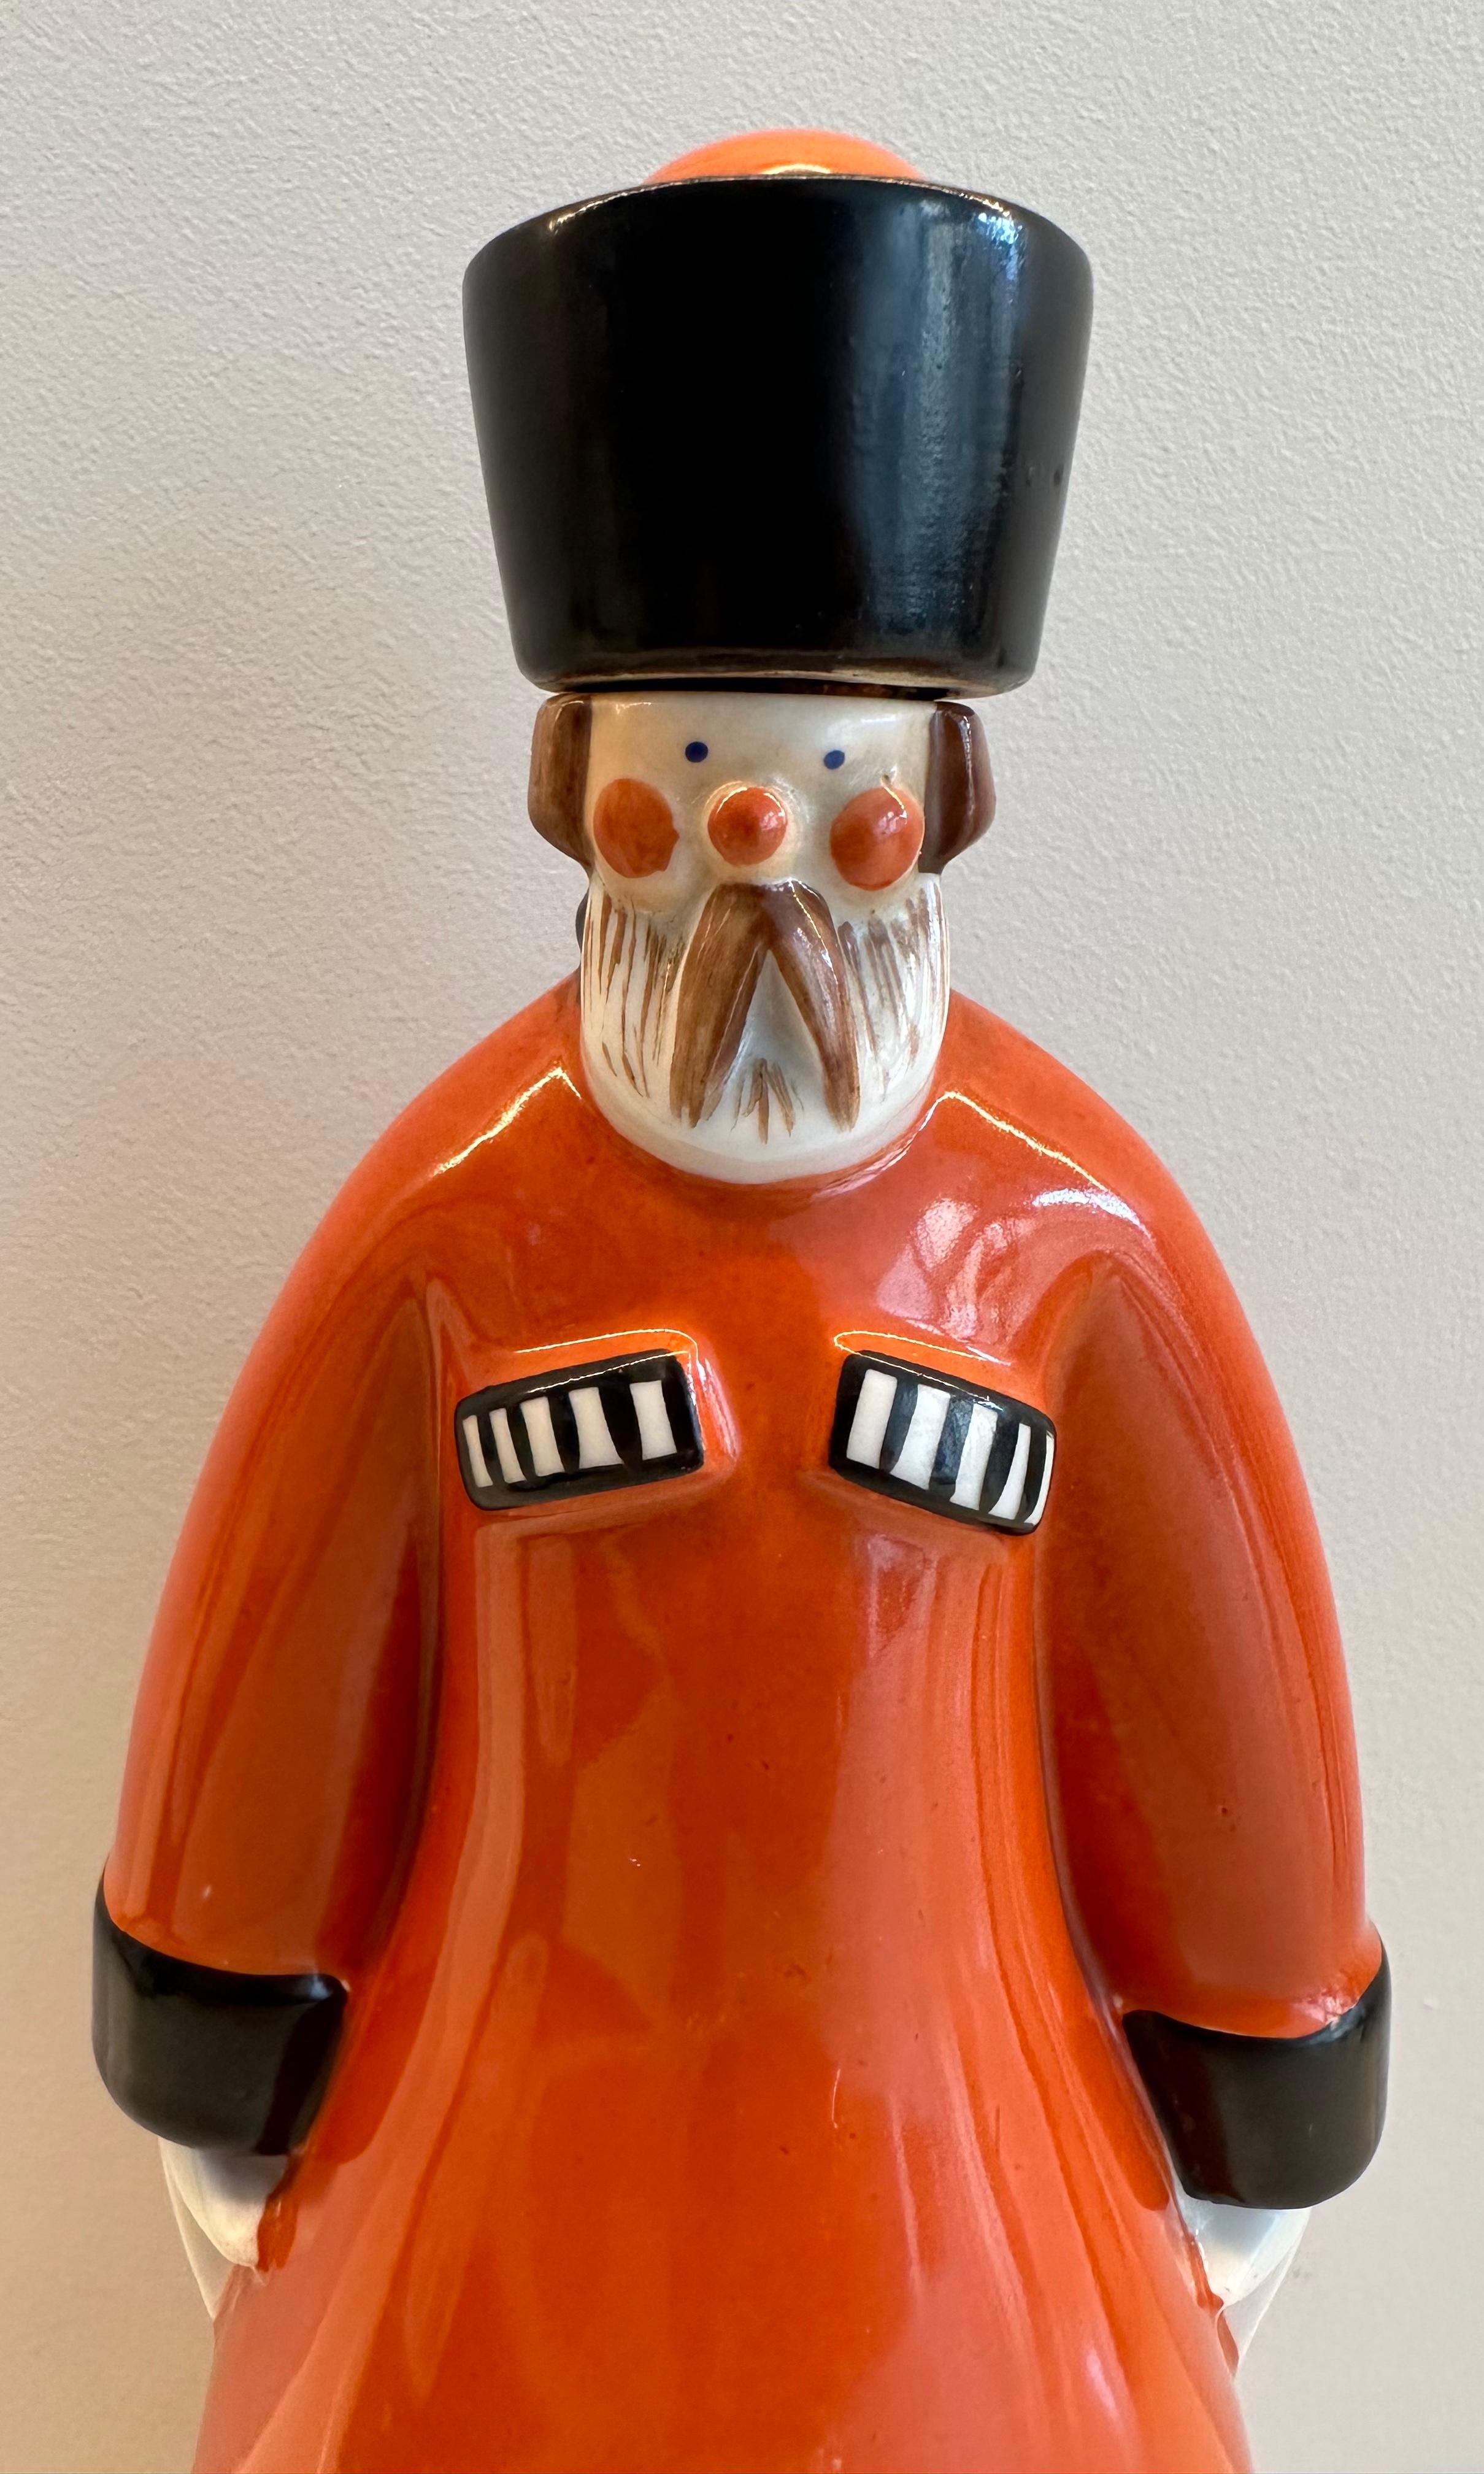 Art Deco 1930s French “Curacao” Figural Russian Soldier Flask by Robj Paris For Sale 6